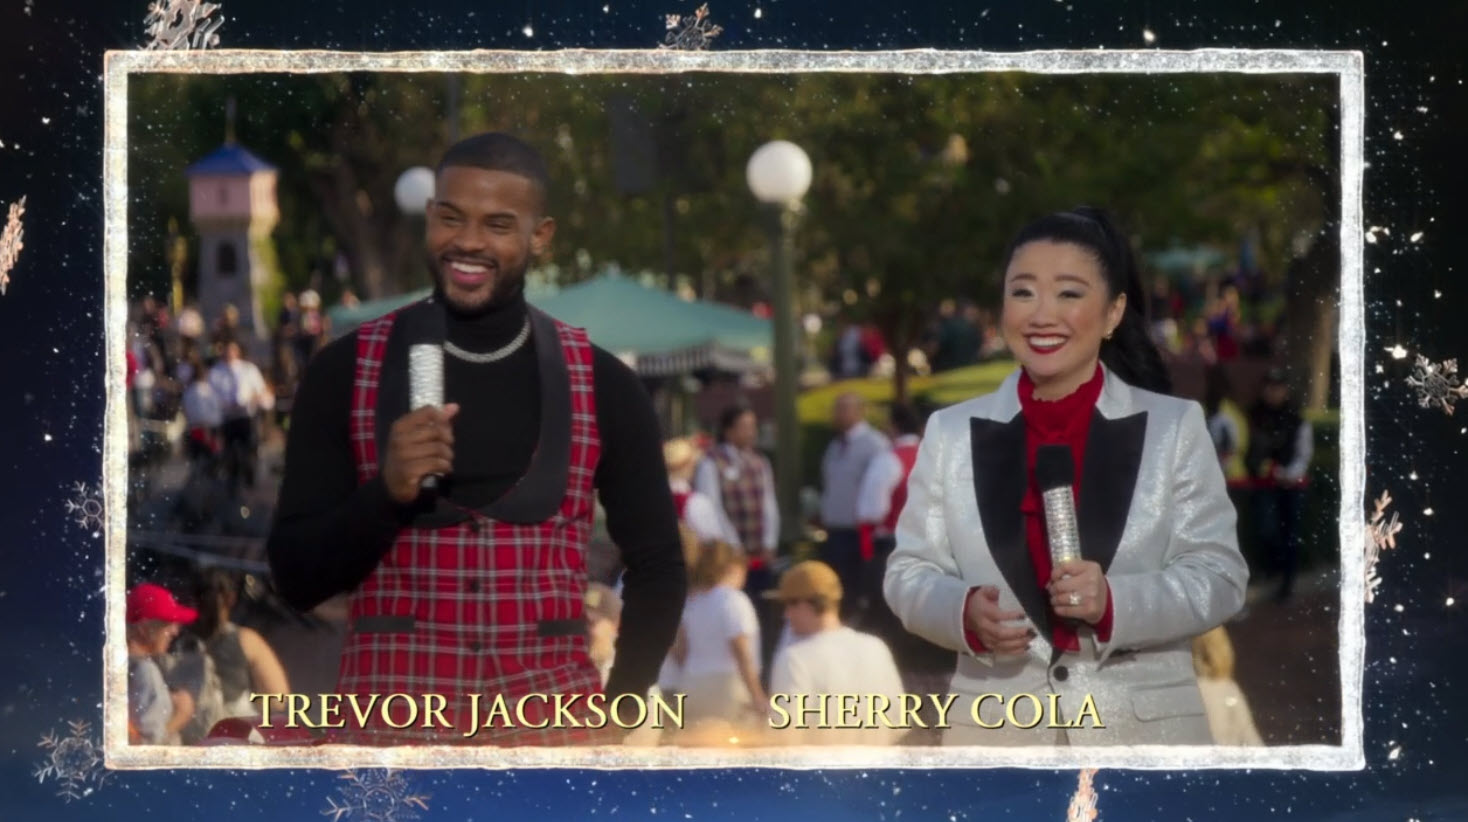 2021 Disney Parks Magical Christmas Day Parade Freeform’s Trevor Jackson (“grown-ish”) and Sherry Cola (“Good Trouble”) from the Disneyland Resort.